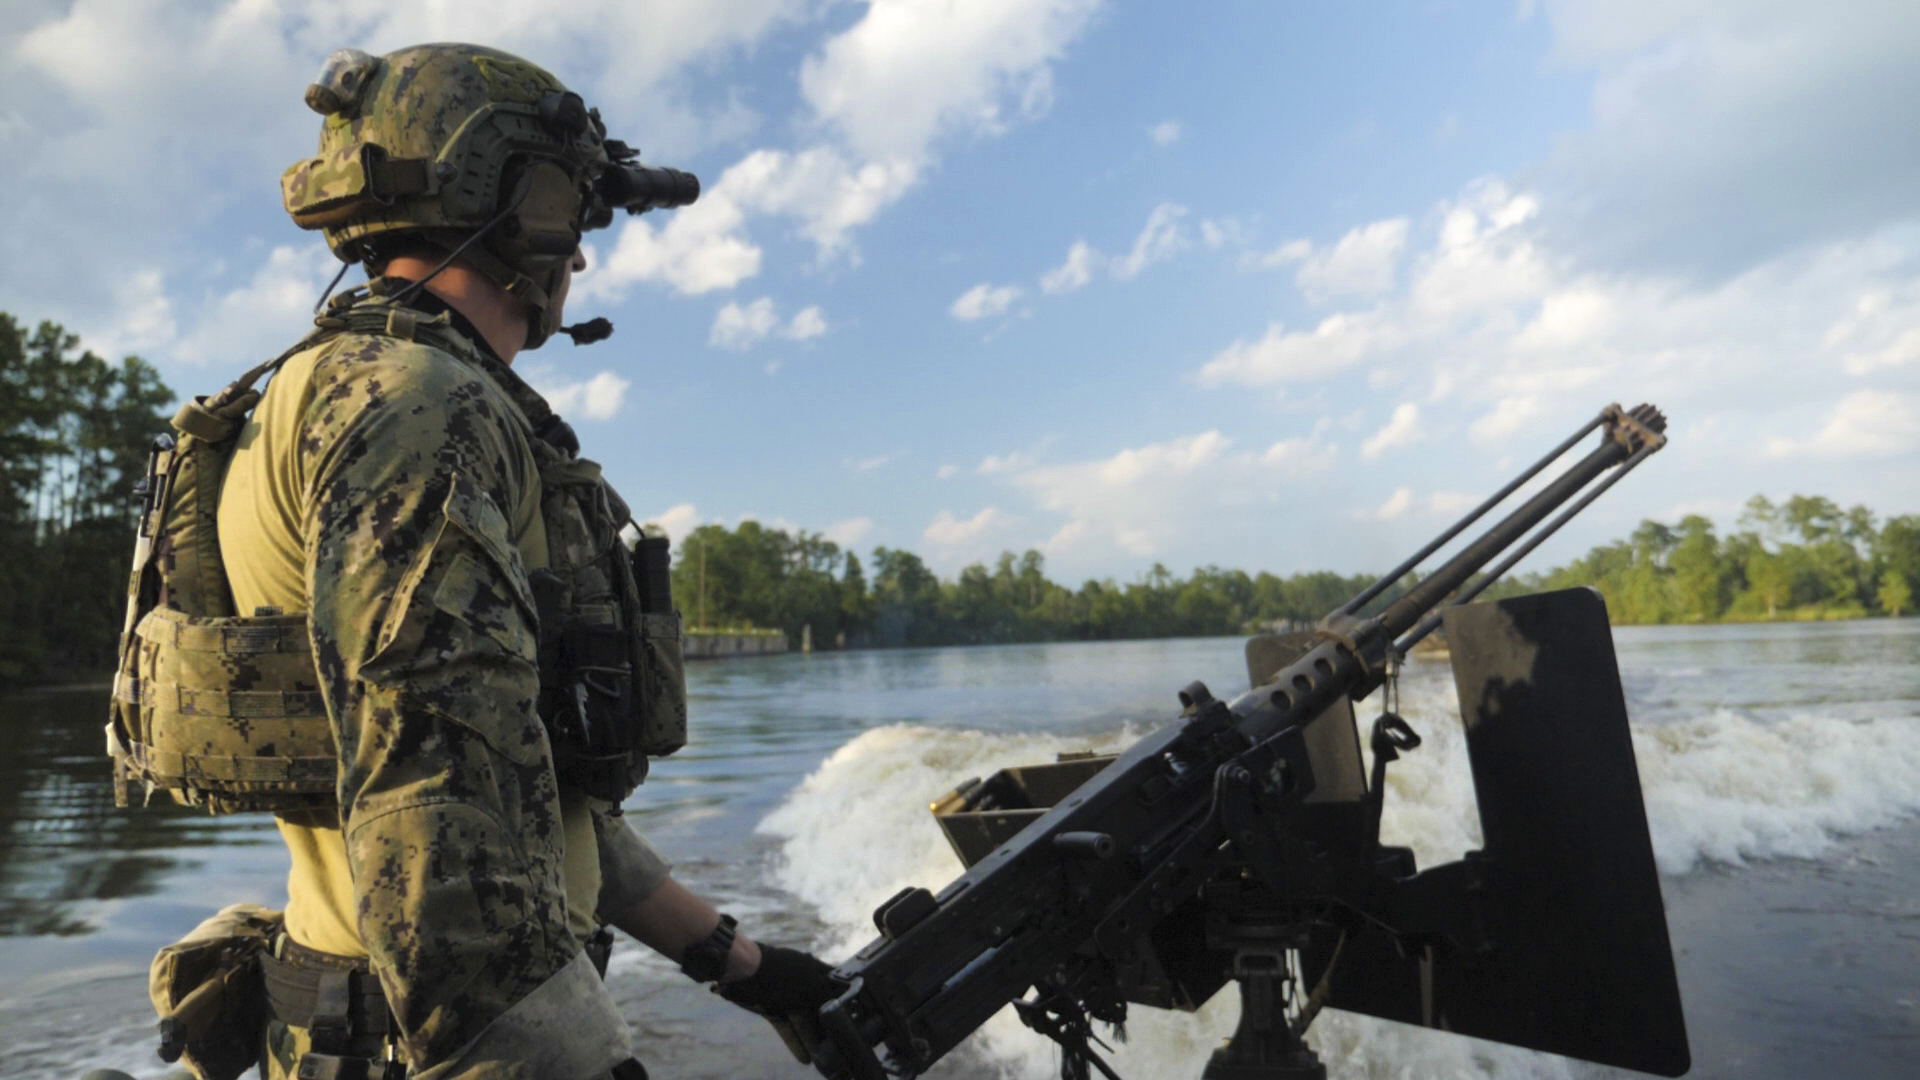 The First Female Operator Passed Naval Special Warfare Training We Are The Mighty